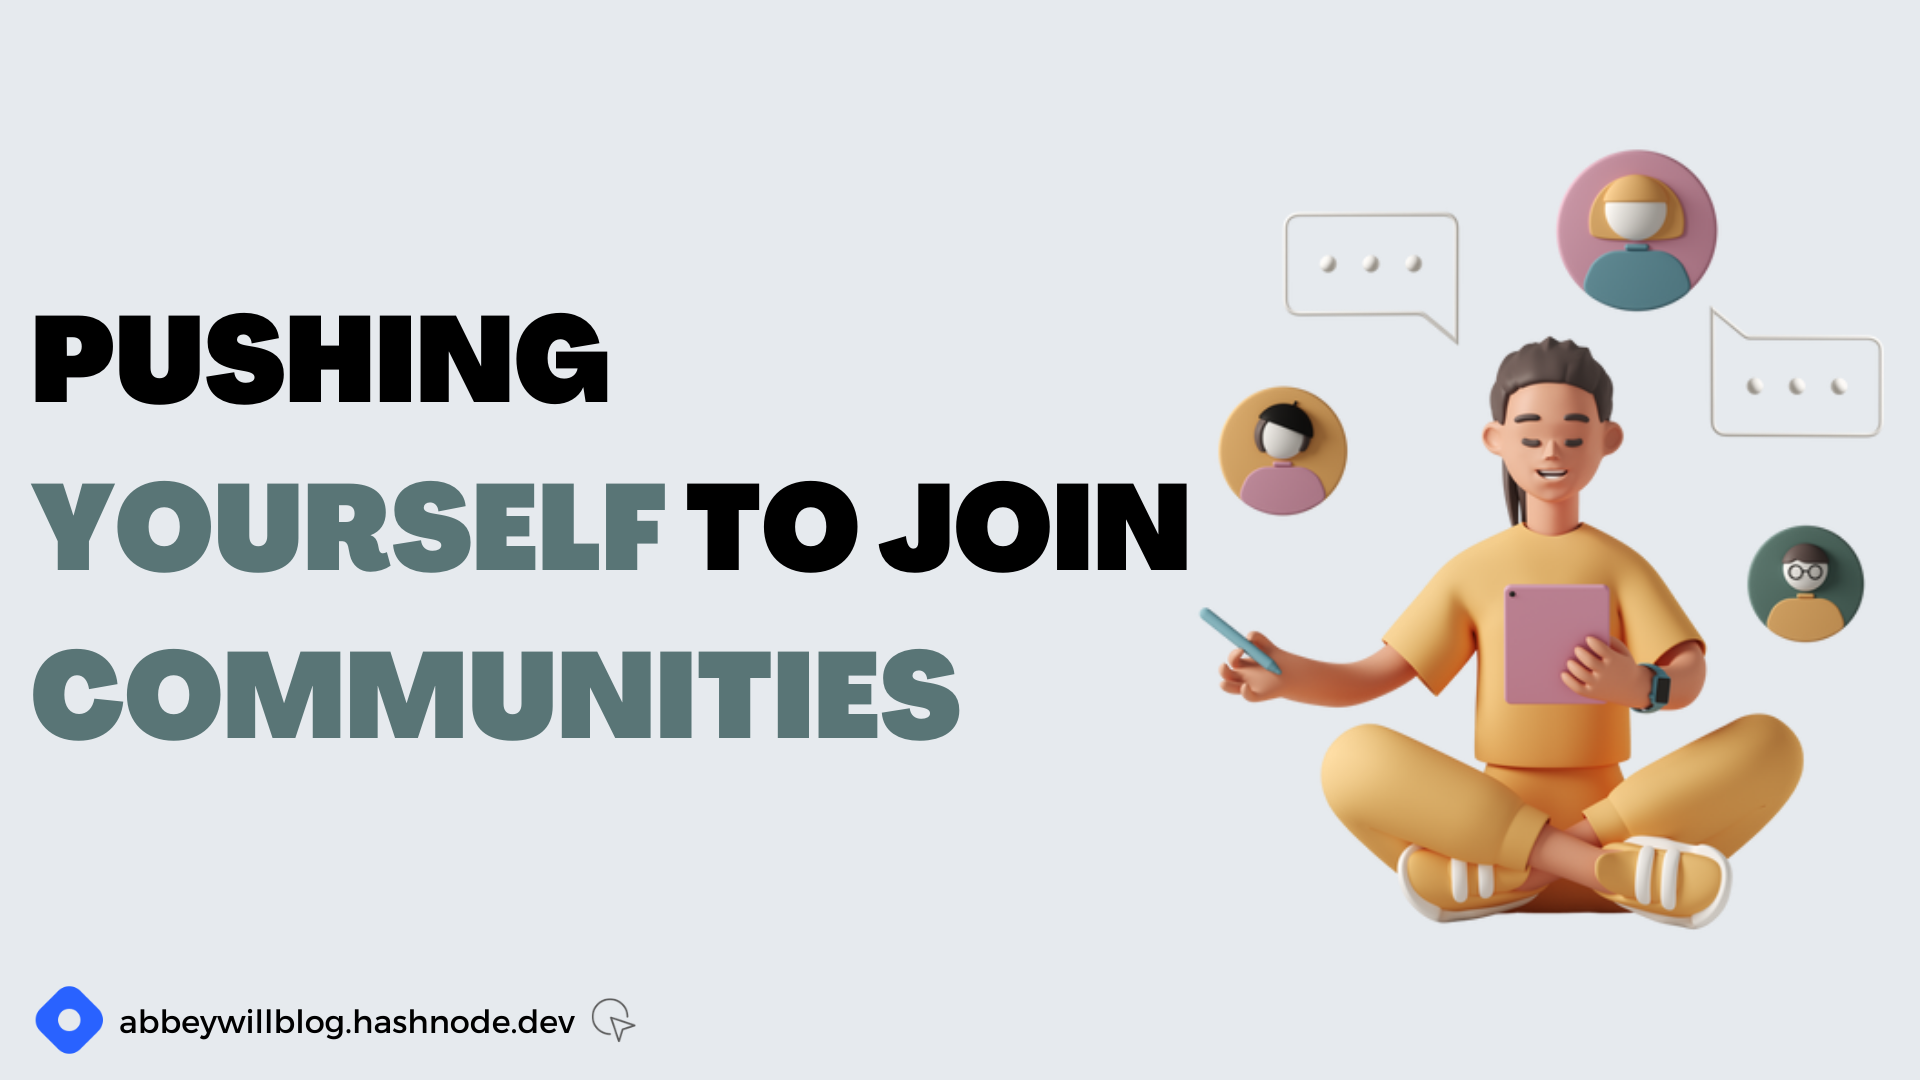 Pushing yourself to join communities